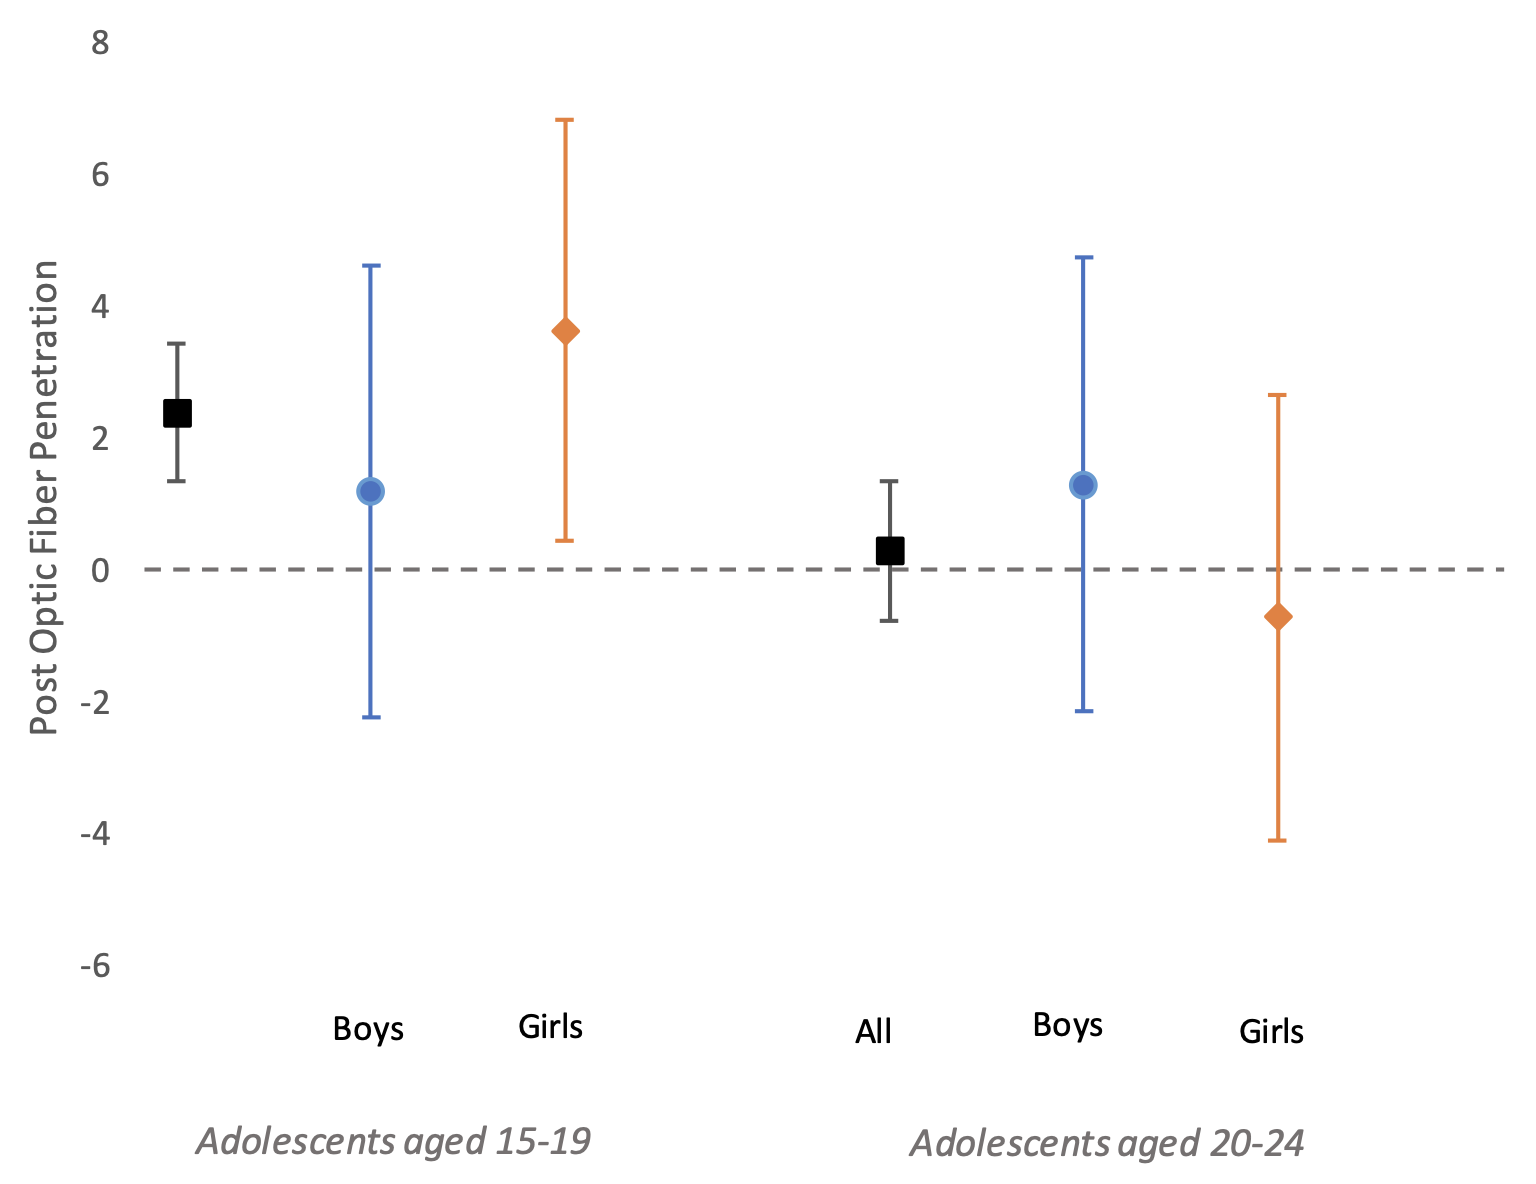 Figure 2 The effect of fibre penetration on the mental health of adolescents